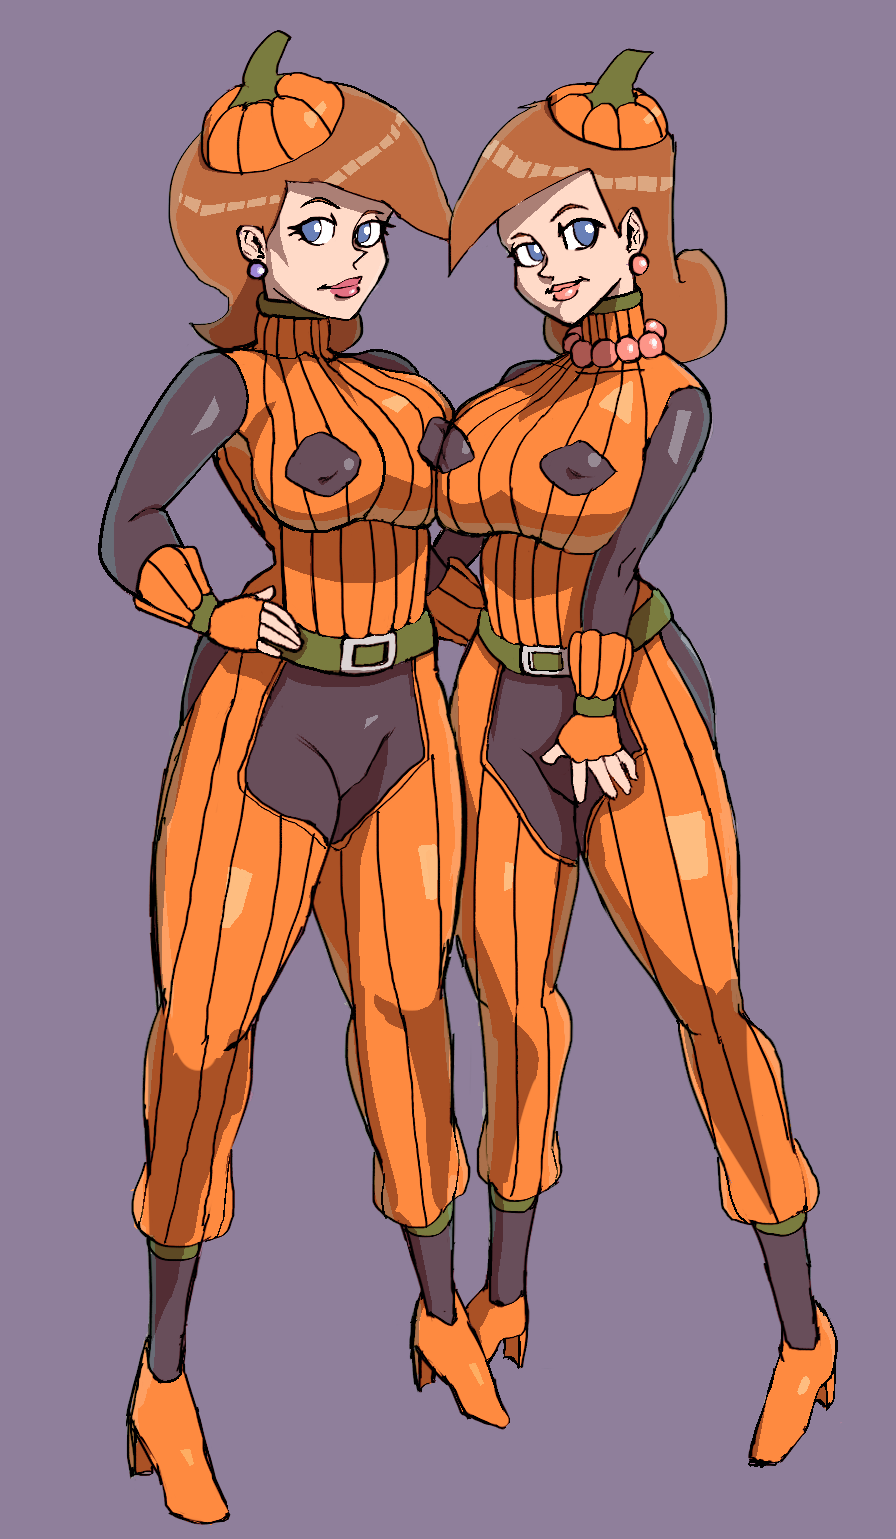 2_girls 89idles aged_up bosom_buddies breast-to-breast breast_docking breasts_press breasts_pressed_together breasts_to_breasts breasts_together clothed clothes clothing cougar daughter docking duo female_only genderswap genderswap_(mtf) halloween_print hourglass_figure mama milf mother mother_&amp;_daughter mrs._turner nickelodeon orange_clothes orange_clothing rubbing_breasts the_fairly_oddparents thicc timantha_turner timmy's_mom timmy_turner wide_hips